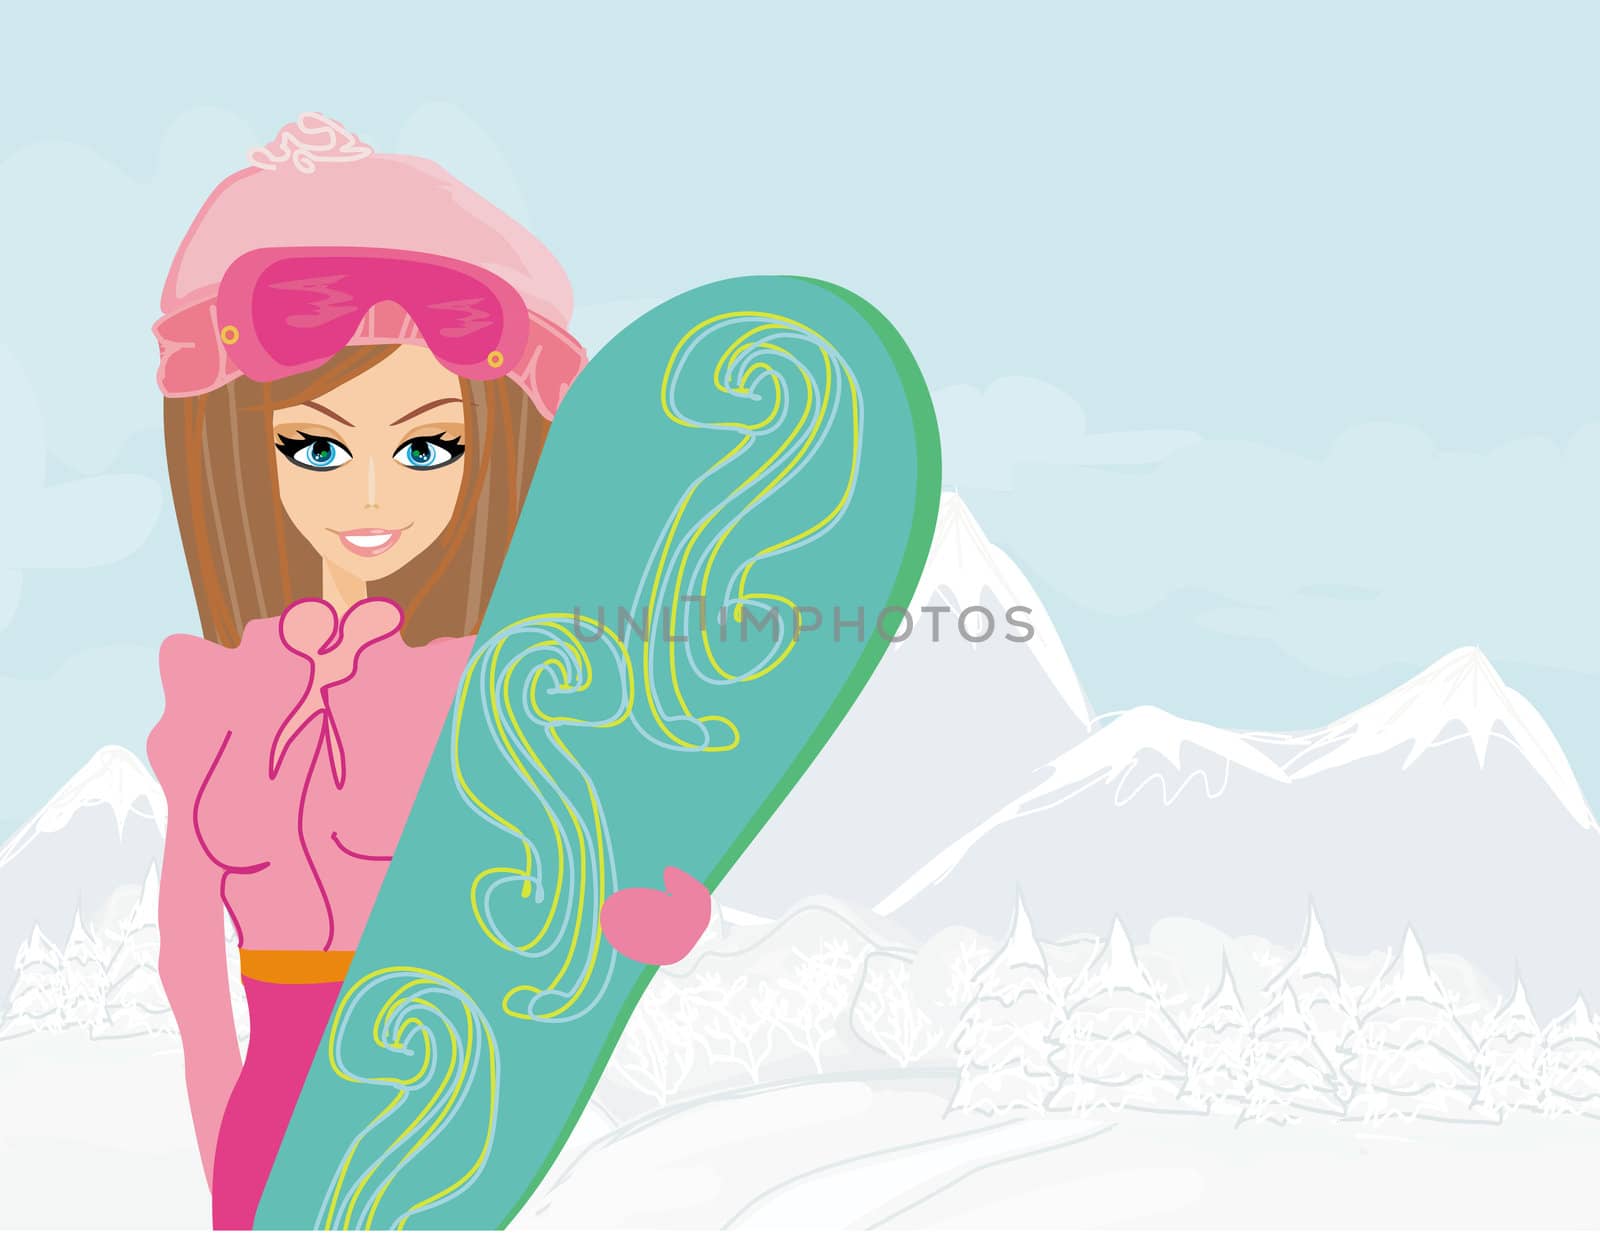 Girl with the snowboard by JackyBrown